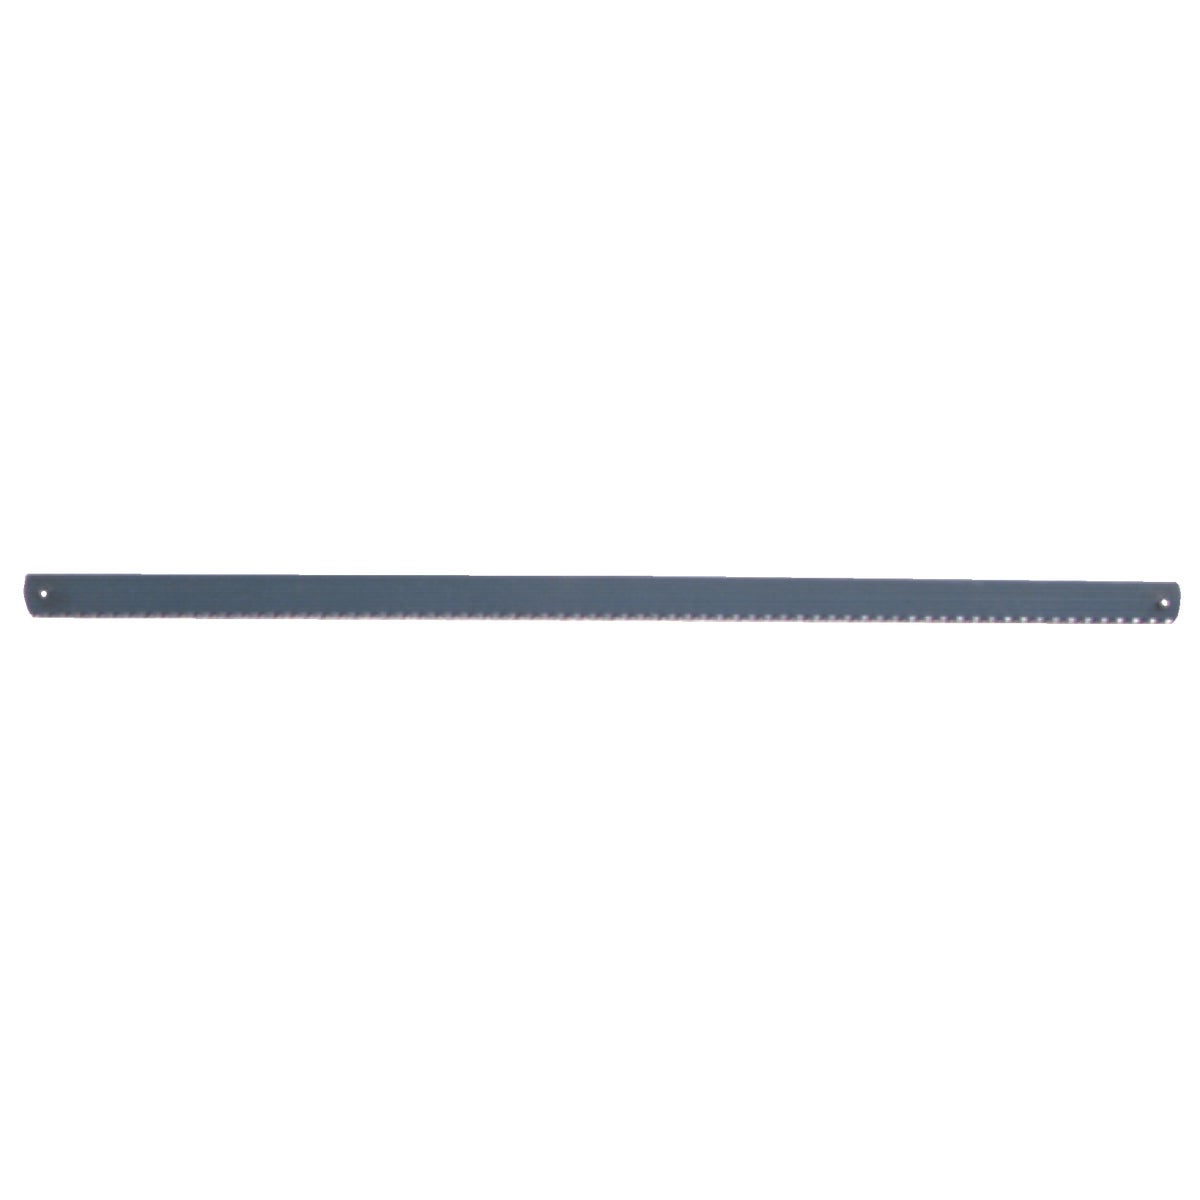 Item 492248, For use with Wolverine pro-quality plumbing hand tool.